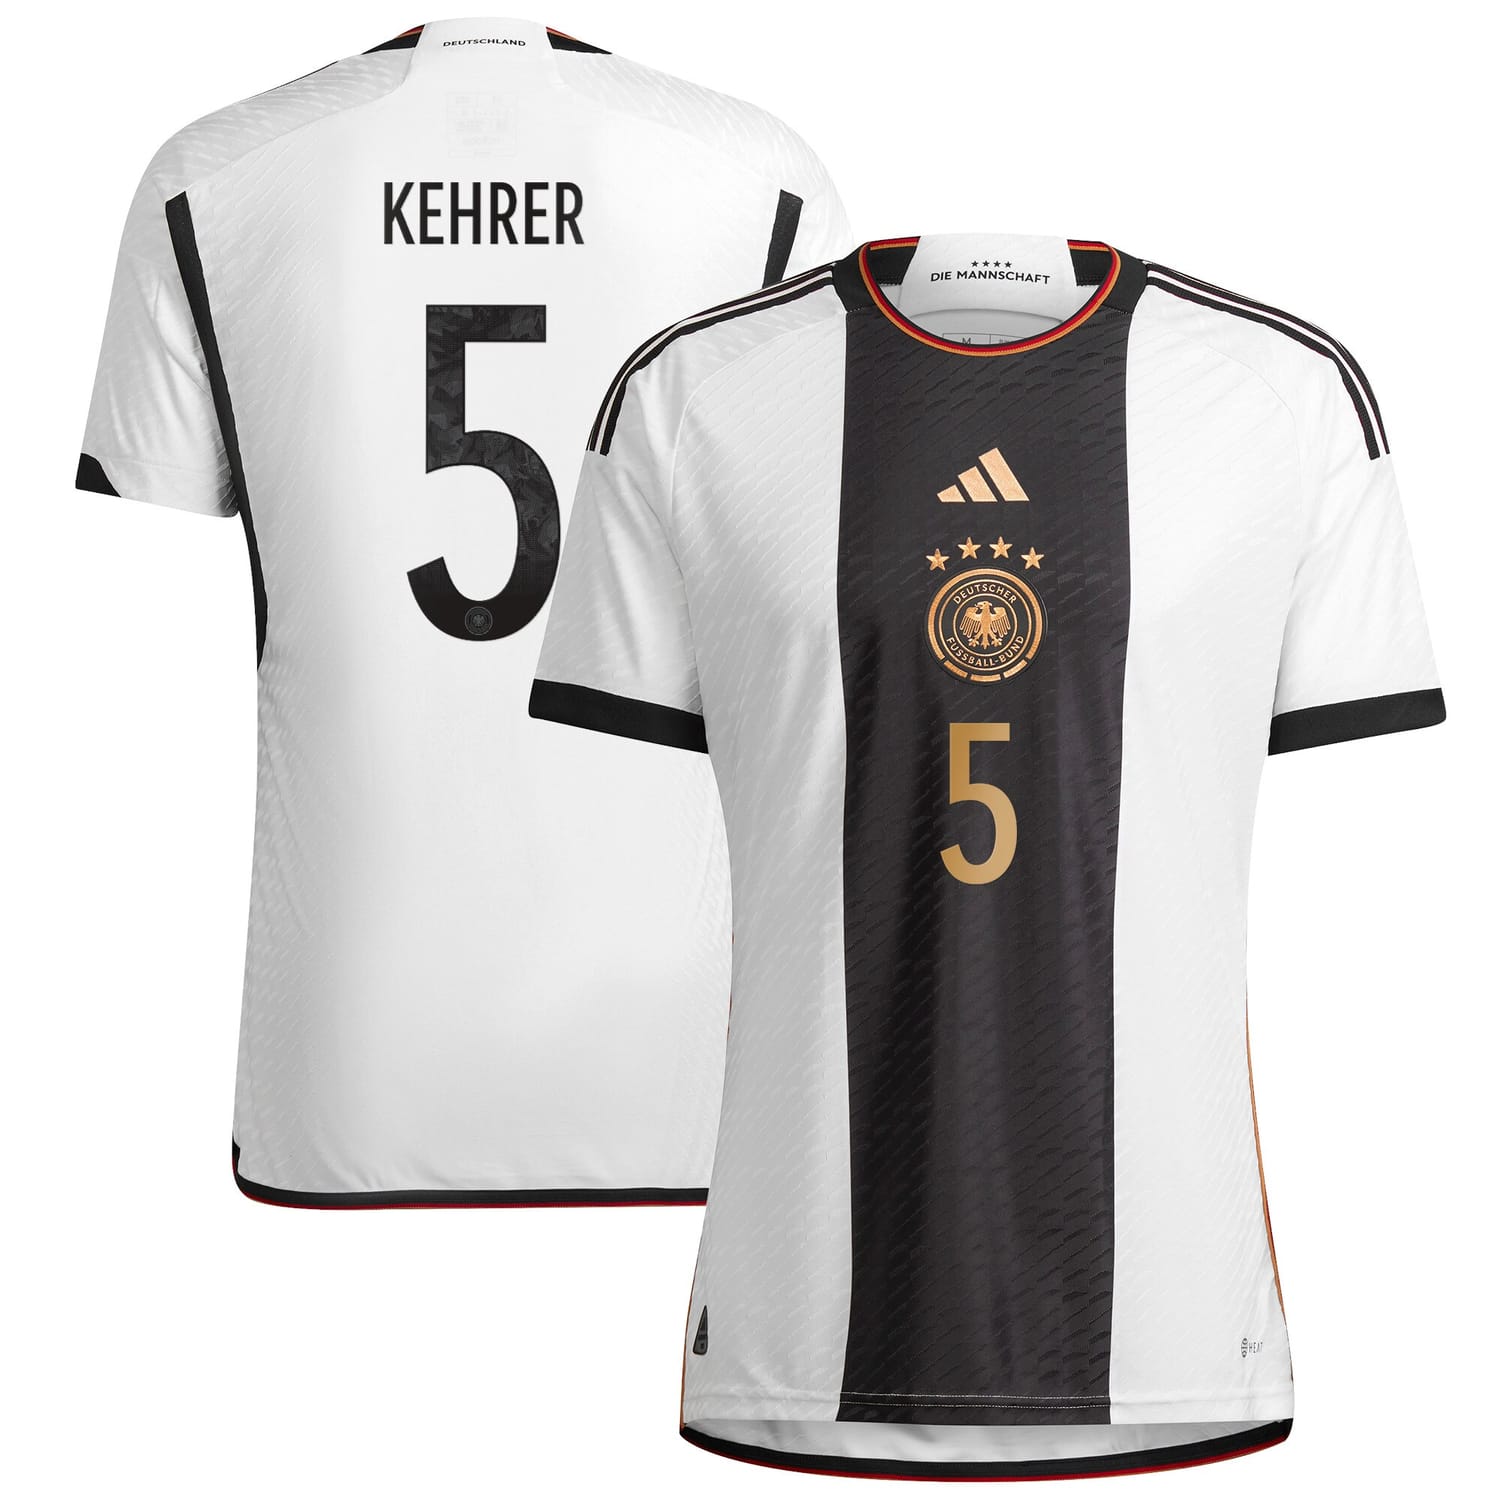 Germany National Team Home Authentic Jersey Shirt player Kehrer 5 printing for Men